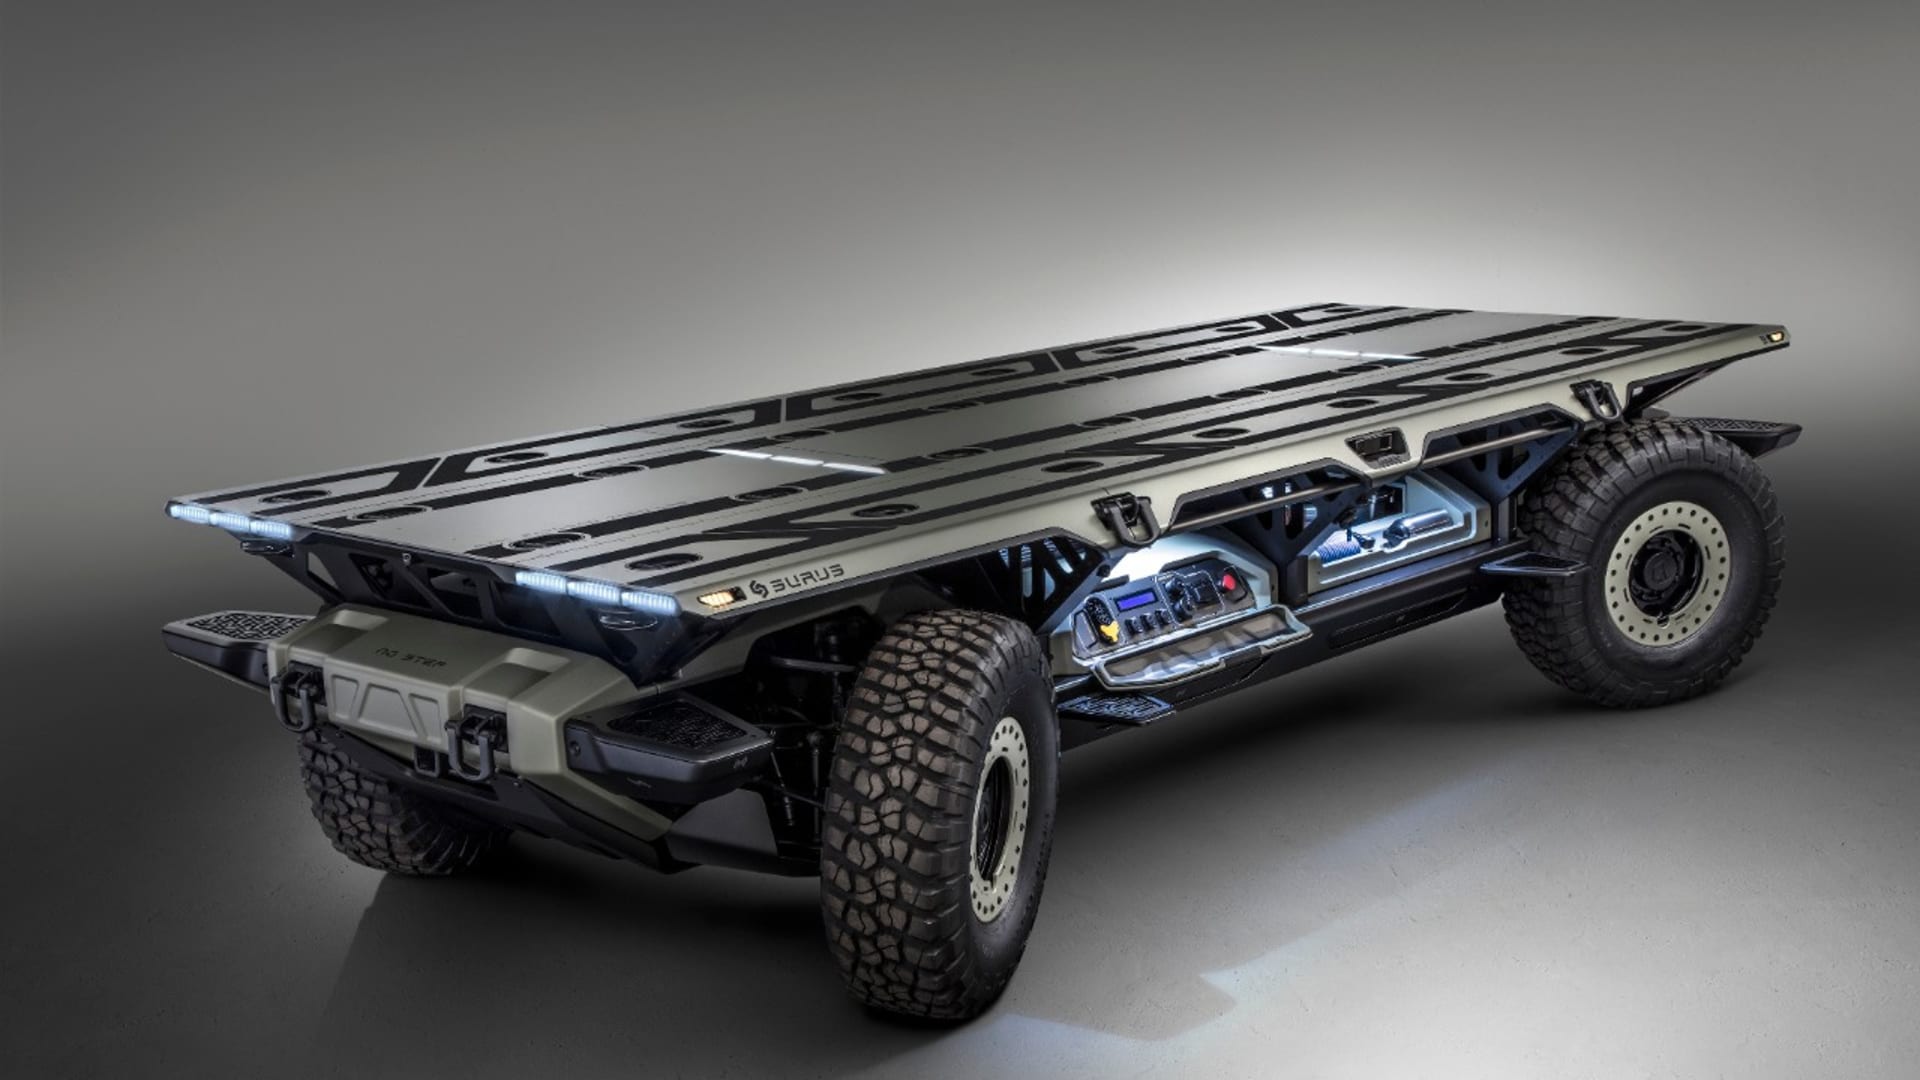 The Silent Utility Rover Universal Superstructure (SURUS) platform is a flexible fuel cell platform with autonomous capabilities, according to GM. It was designed as a foundation for a family of commercial vehicle solutions.